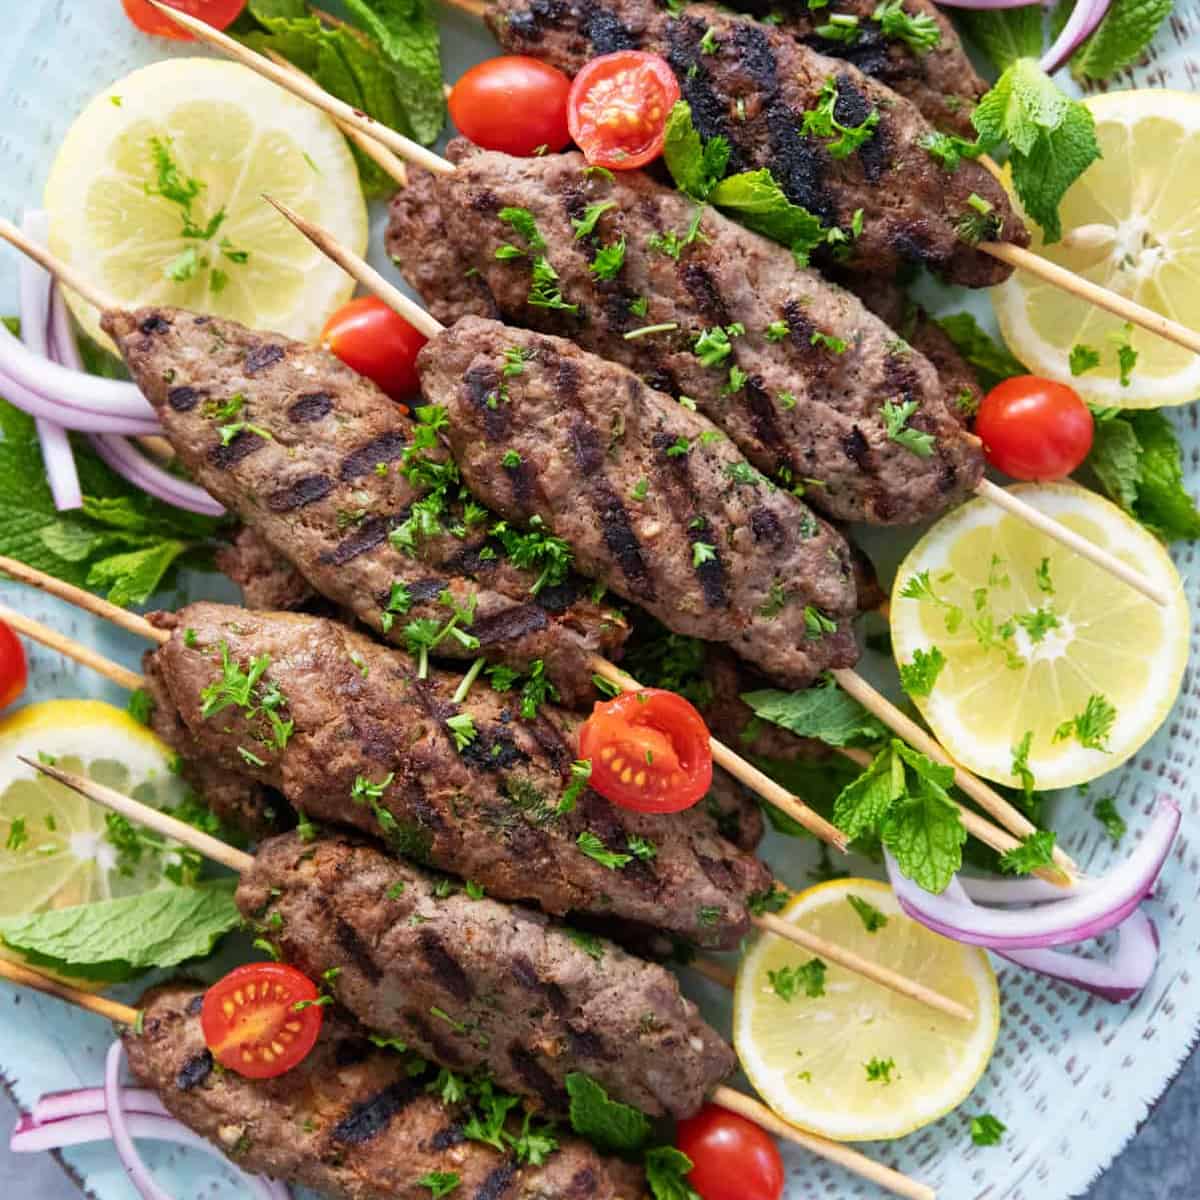 This kofta kebab recipe is a cornerstone of Middle Eastern cuisine. Learn how to make juicy kofta kebab on the grill and serve with pita, veggies and tahini sauce.
